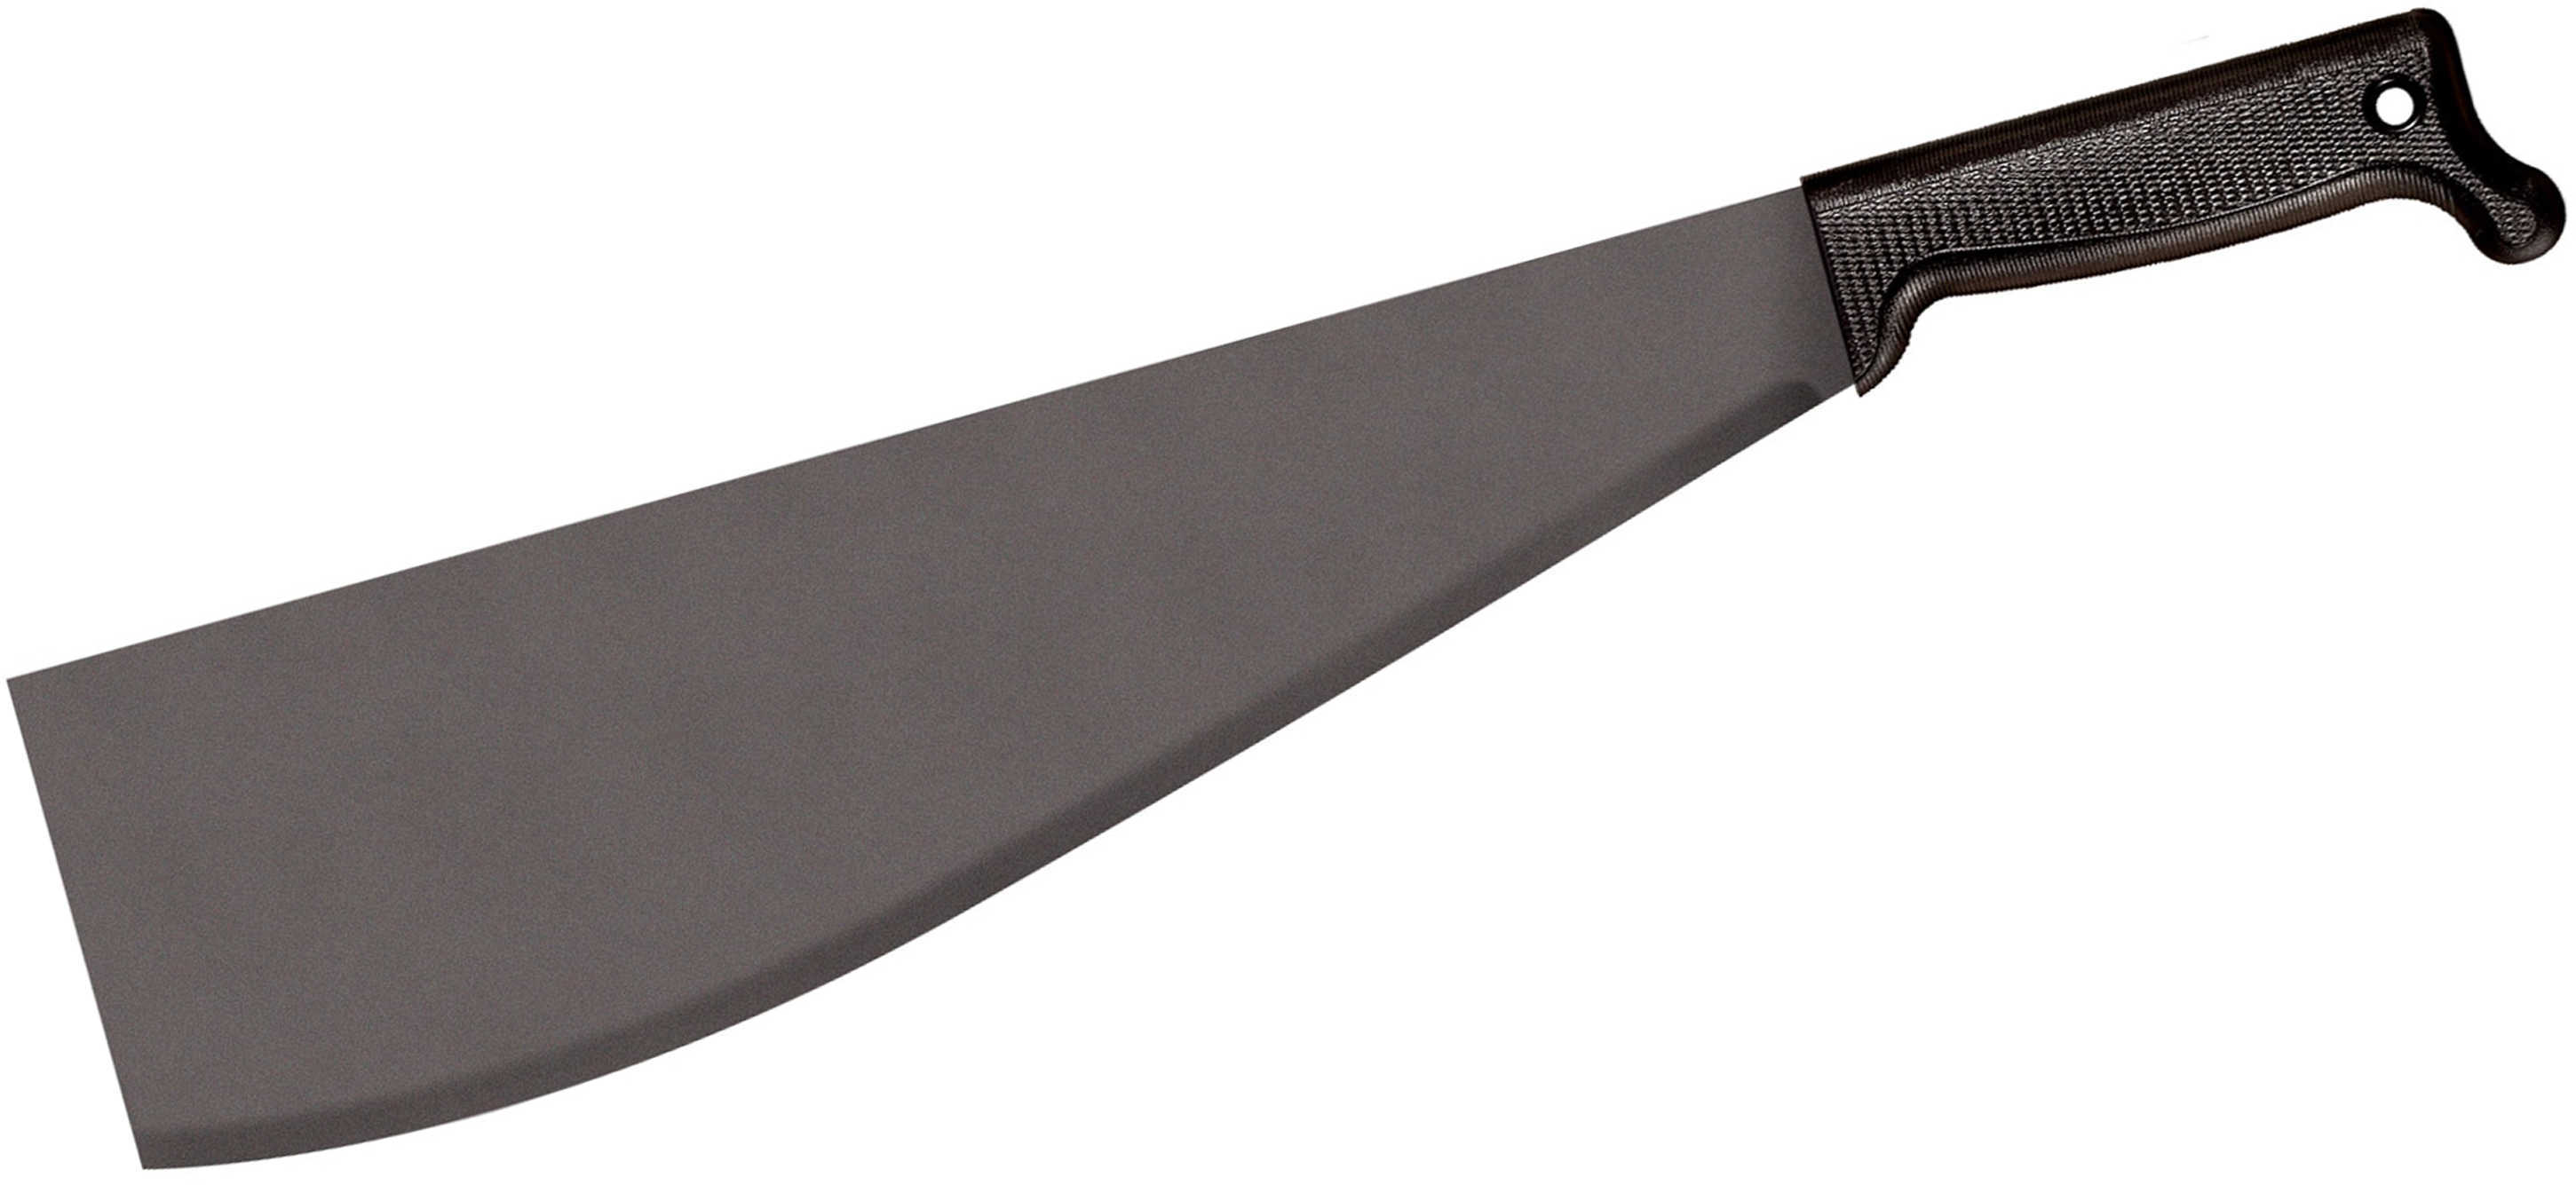 Machete - Heavy with Sheath Md: 97LHMS Cold Steel